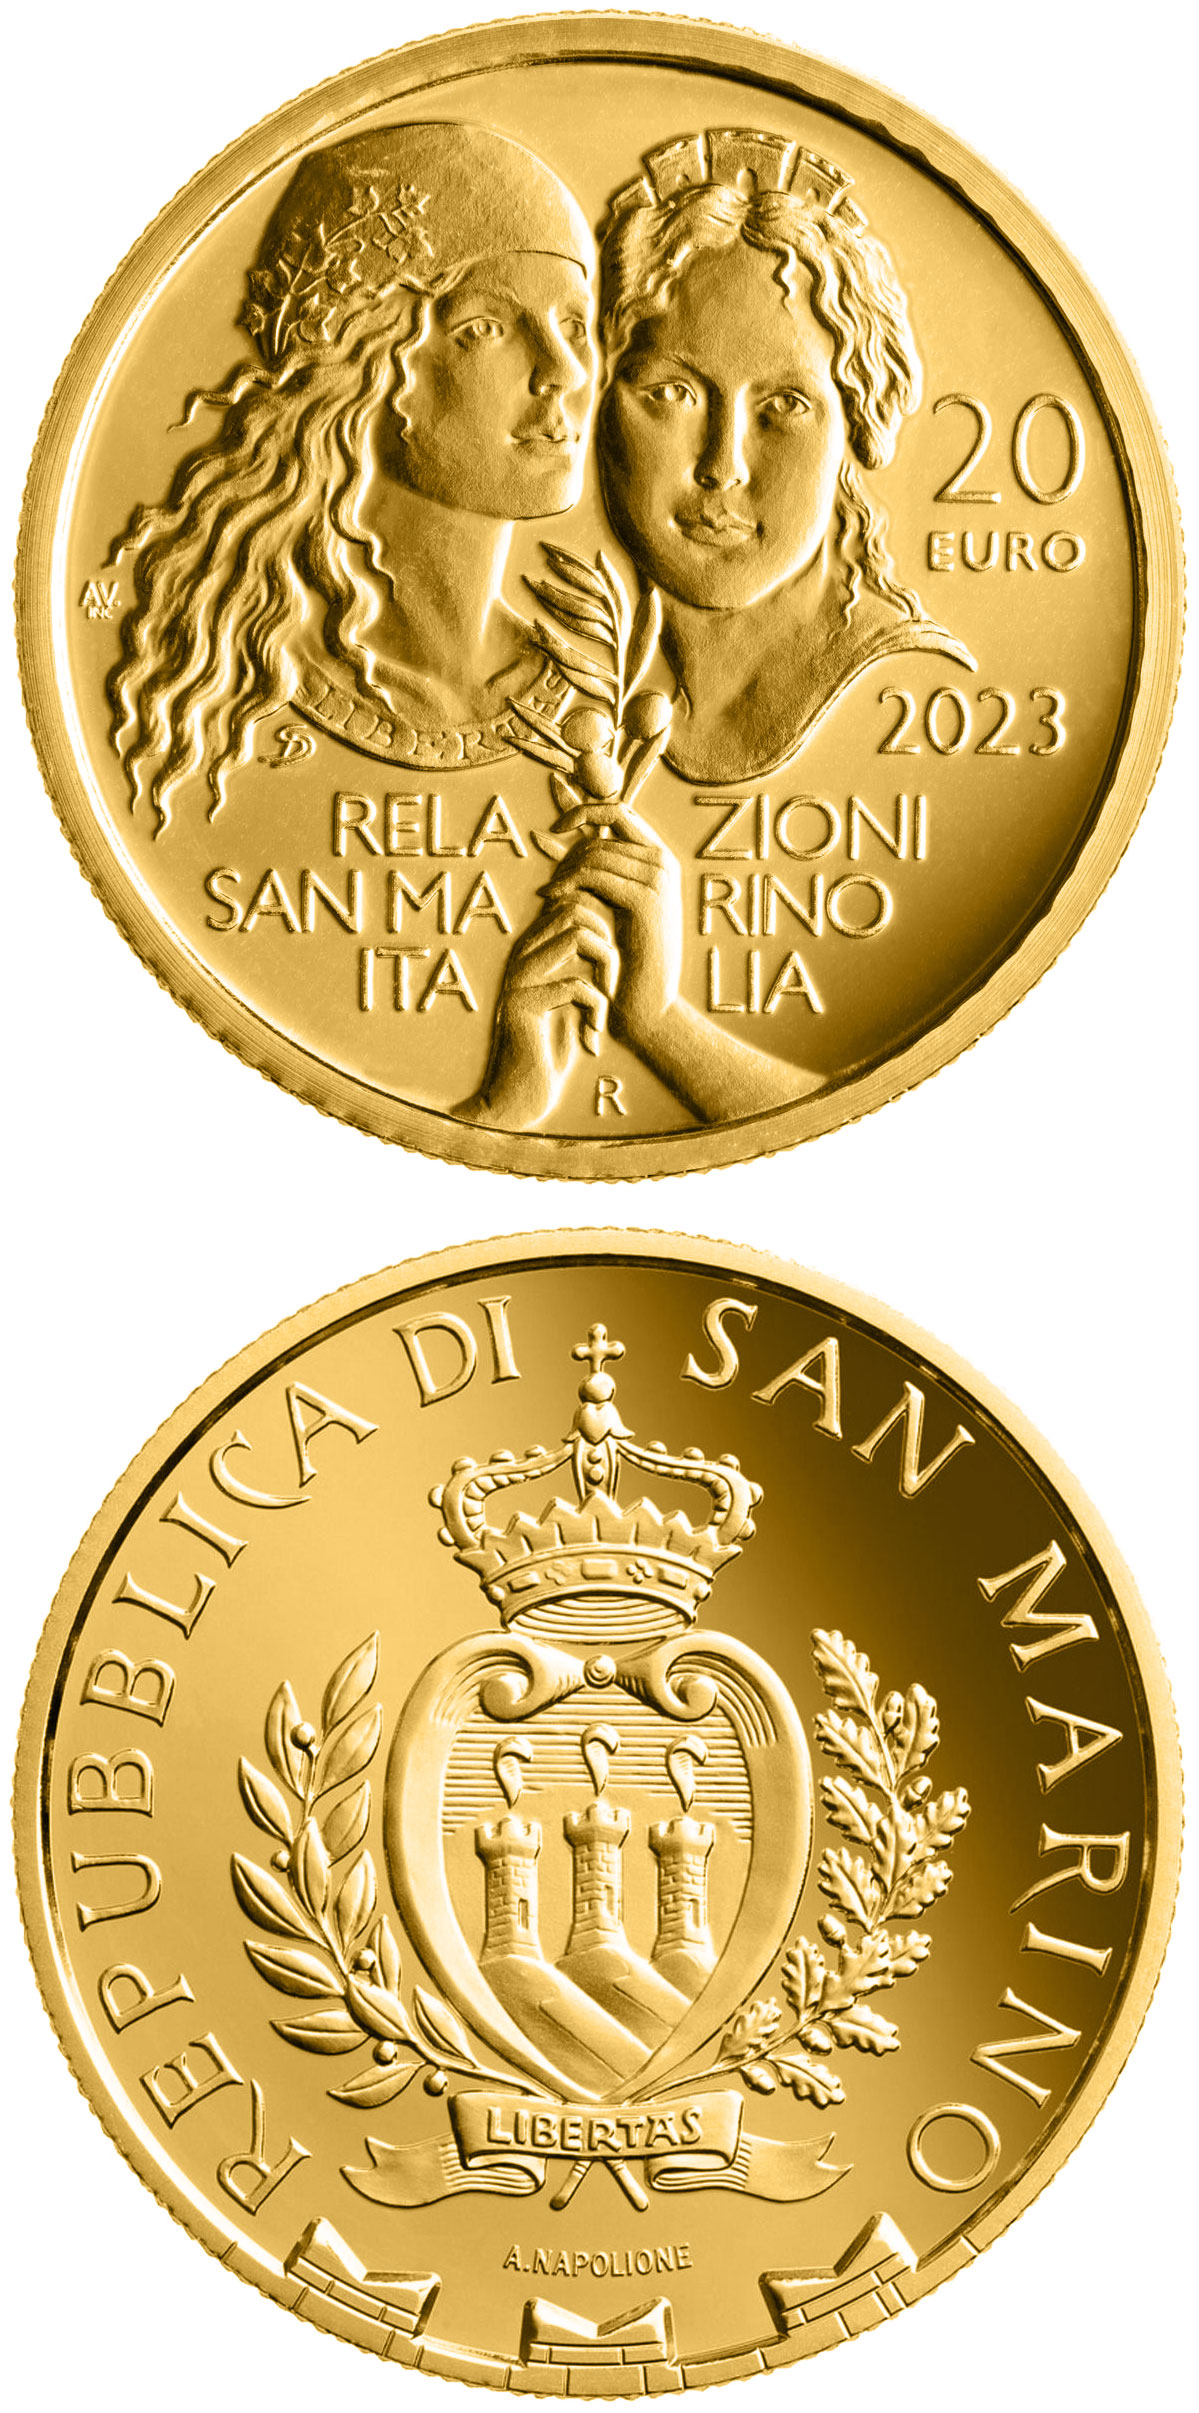 Image of 20 euro coin - Relations between San Marino and Italy | San Marino 2023.  The Gold coin is of BU quality.